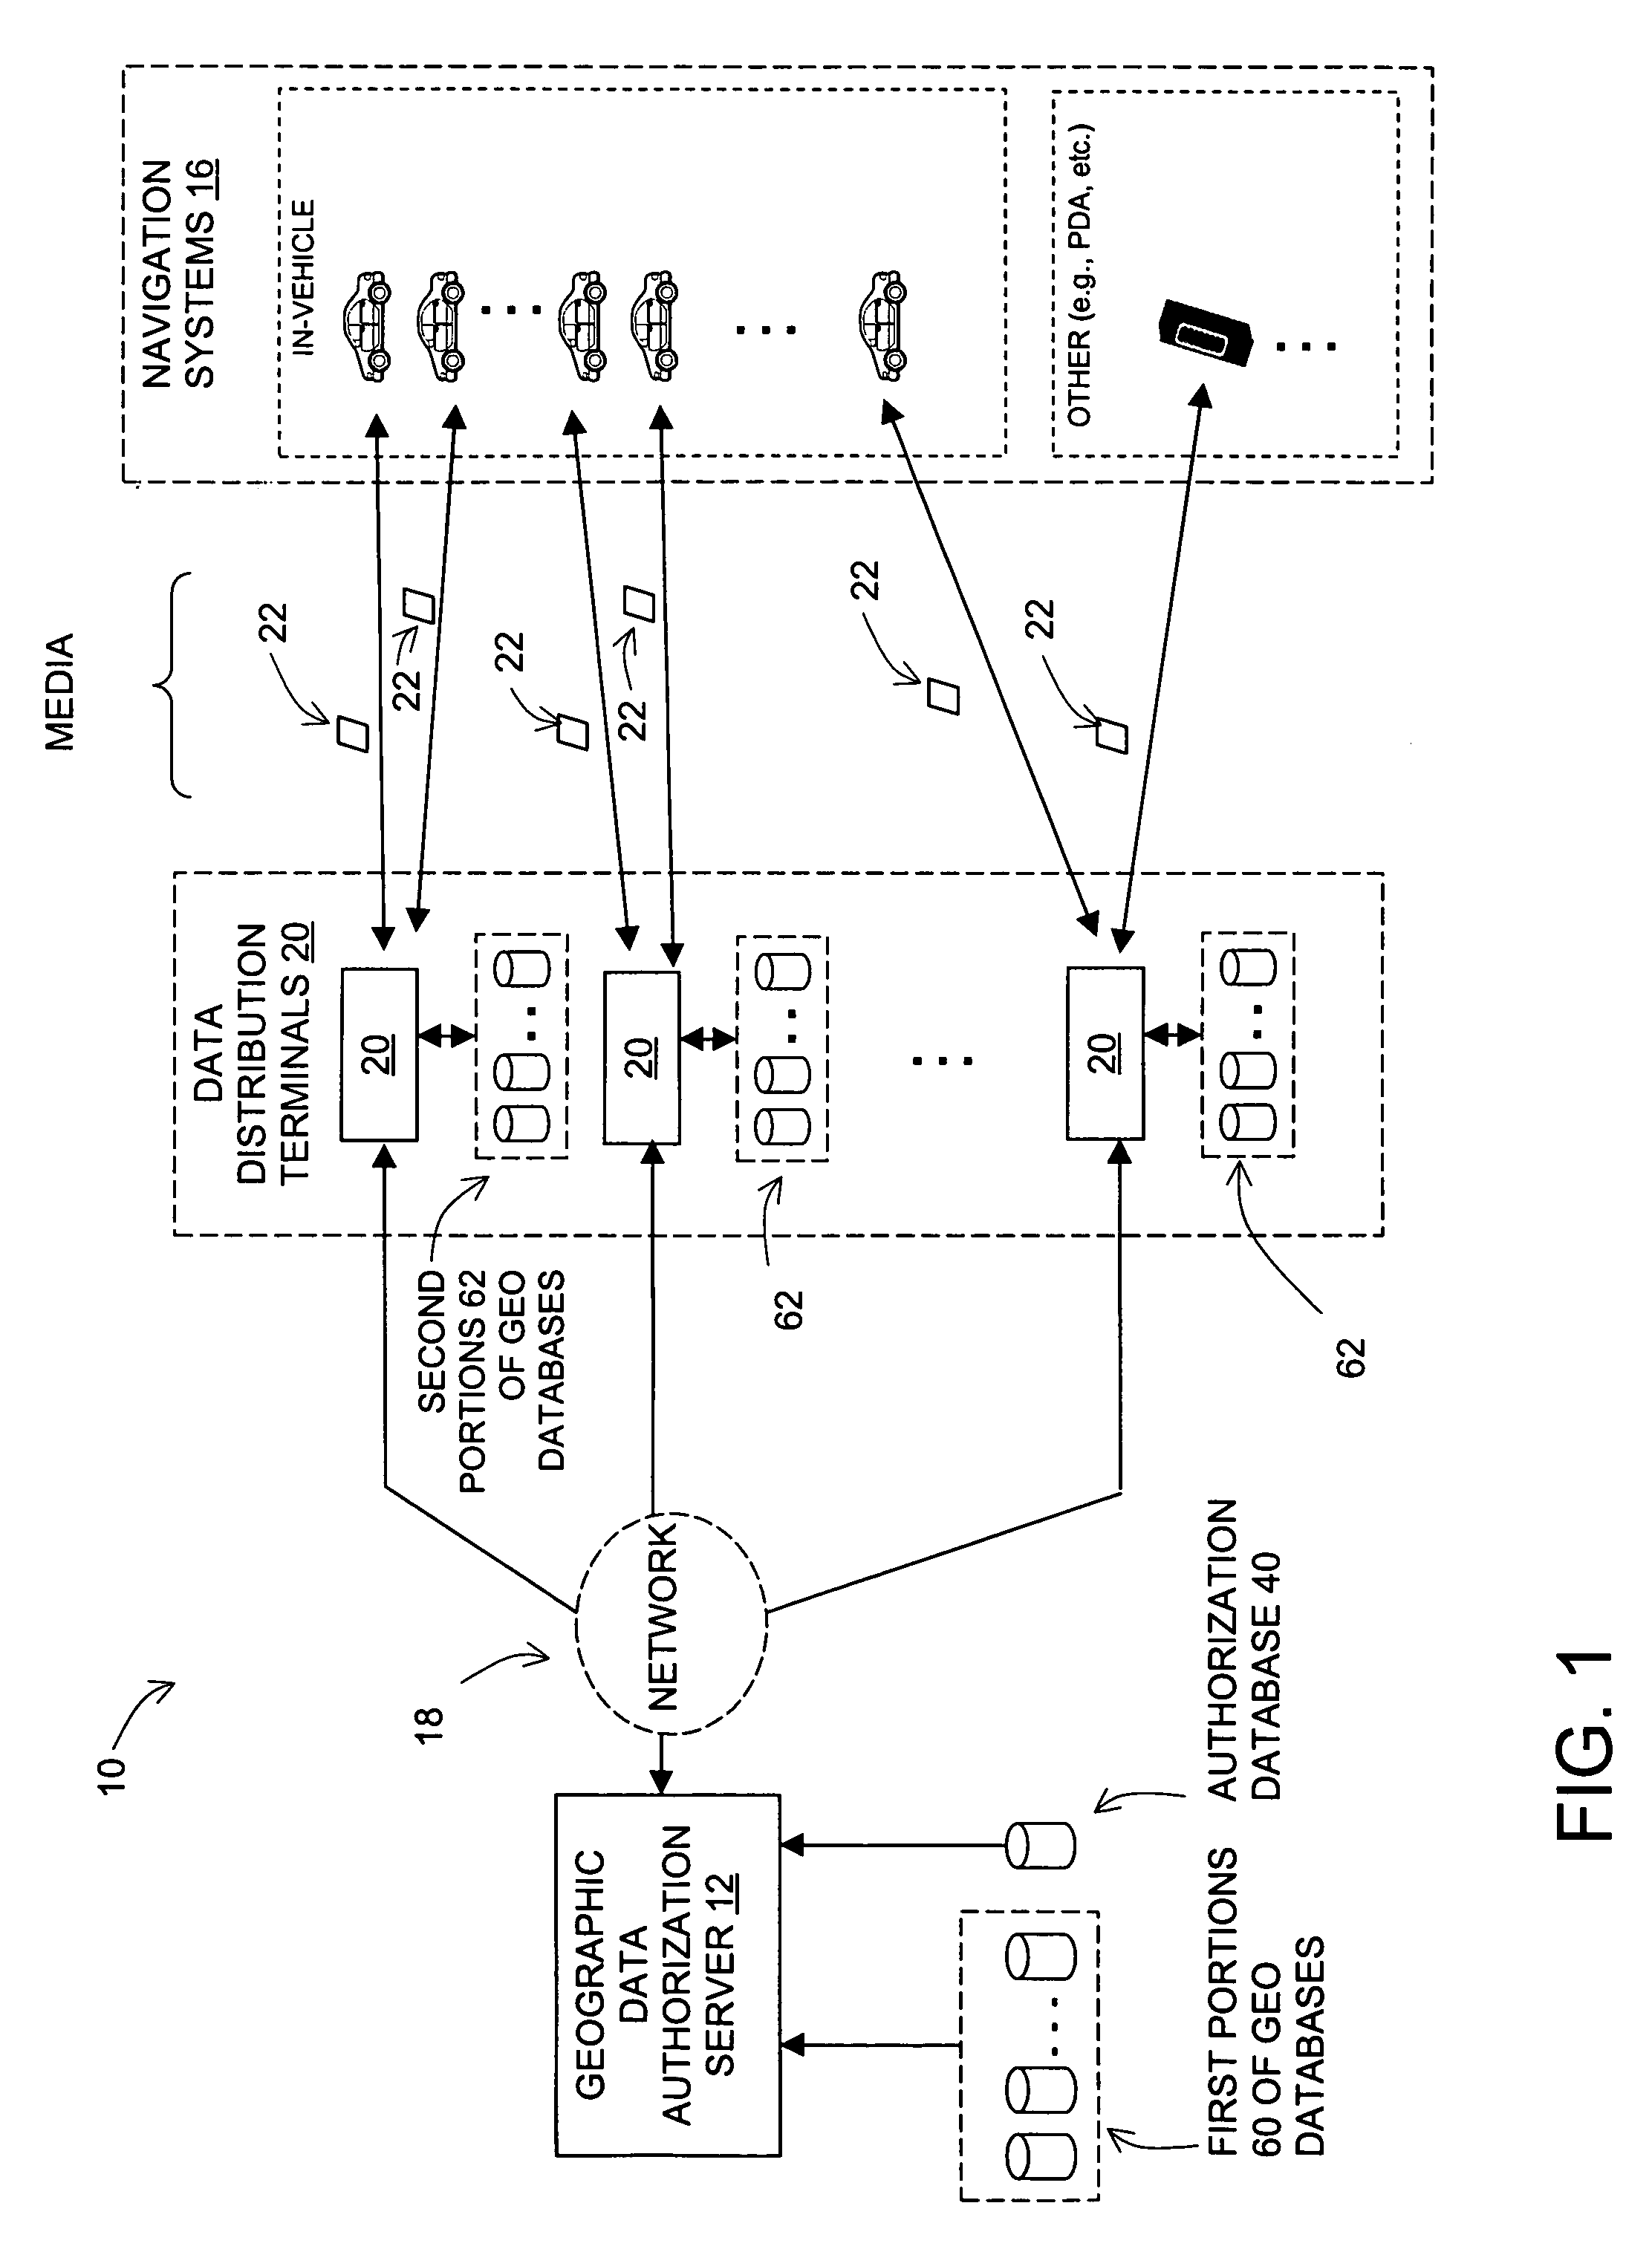 Method and system for mass distribution of geographic data for navigation systems